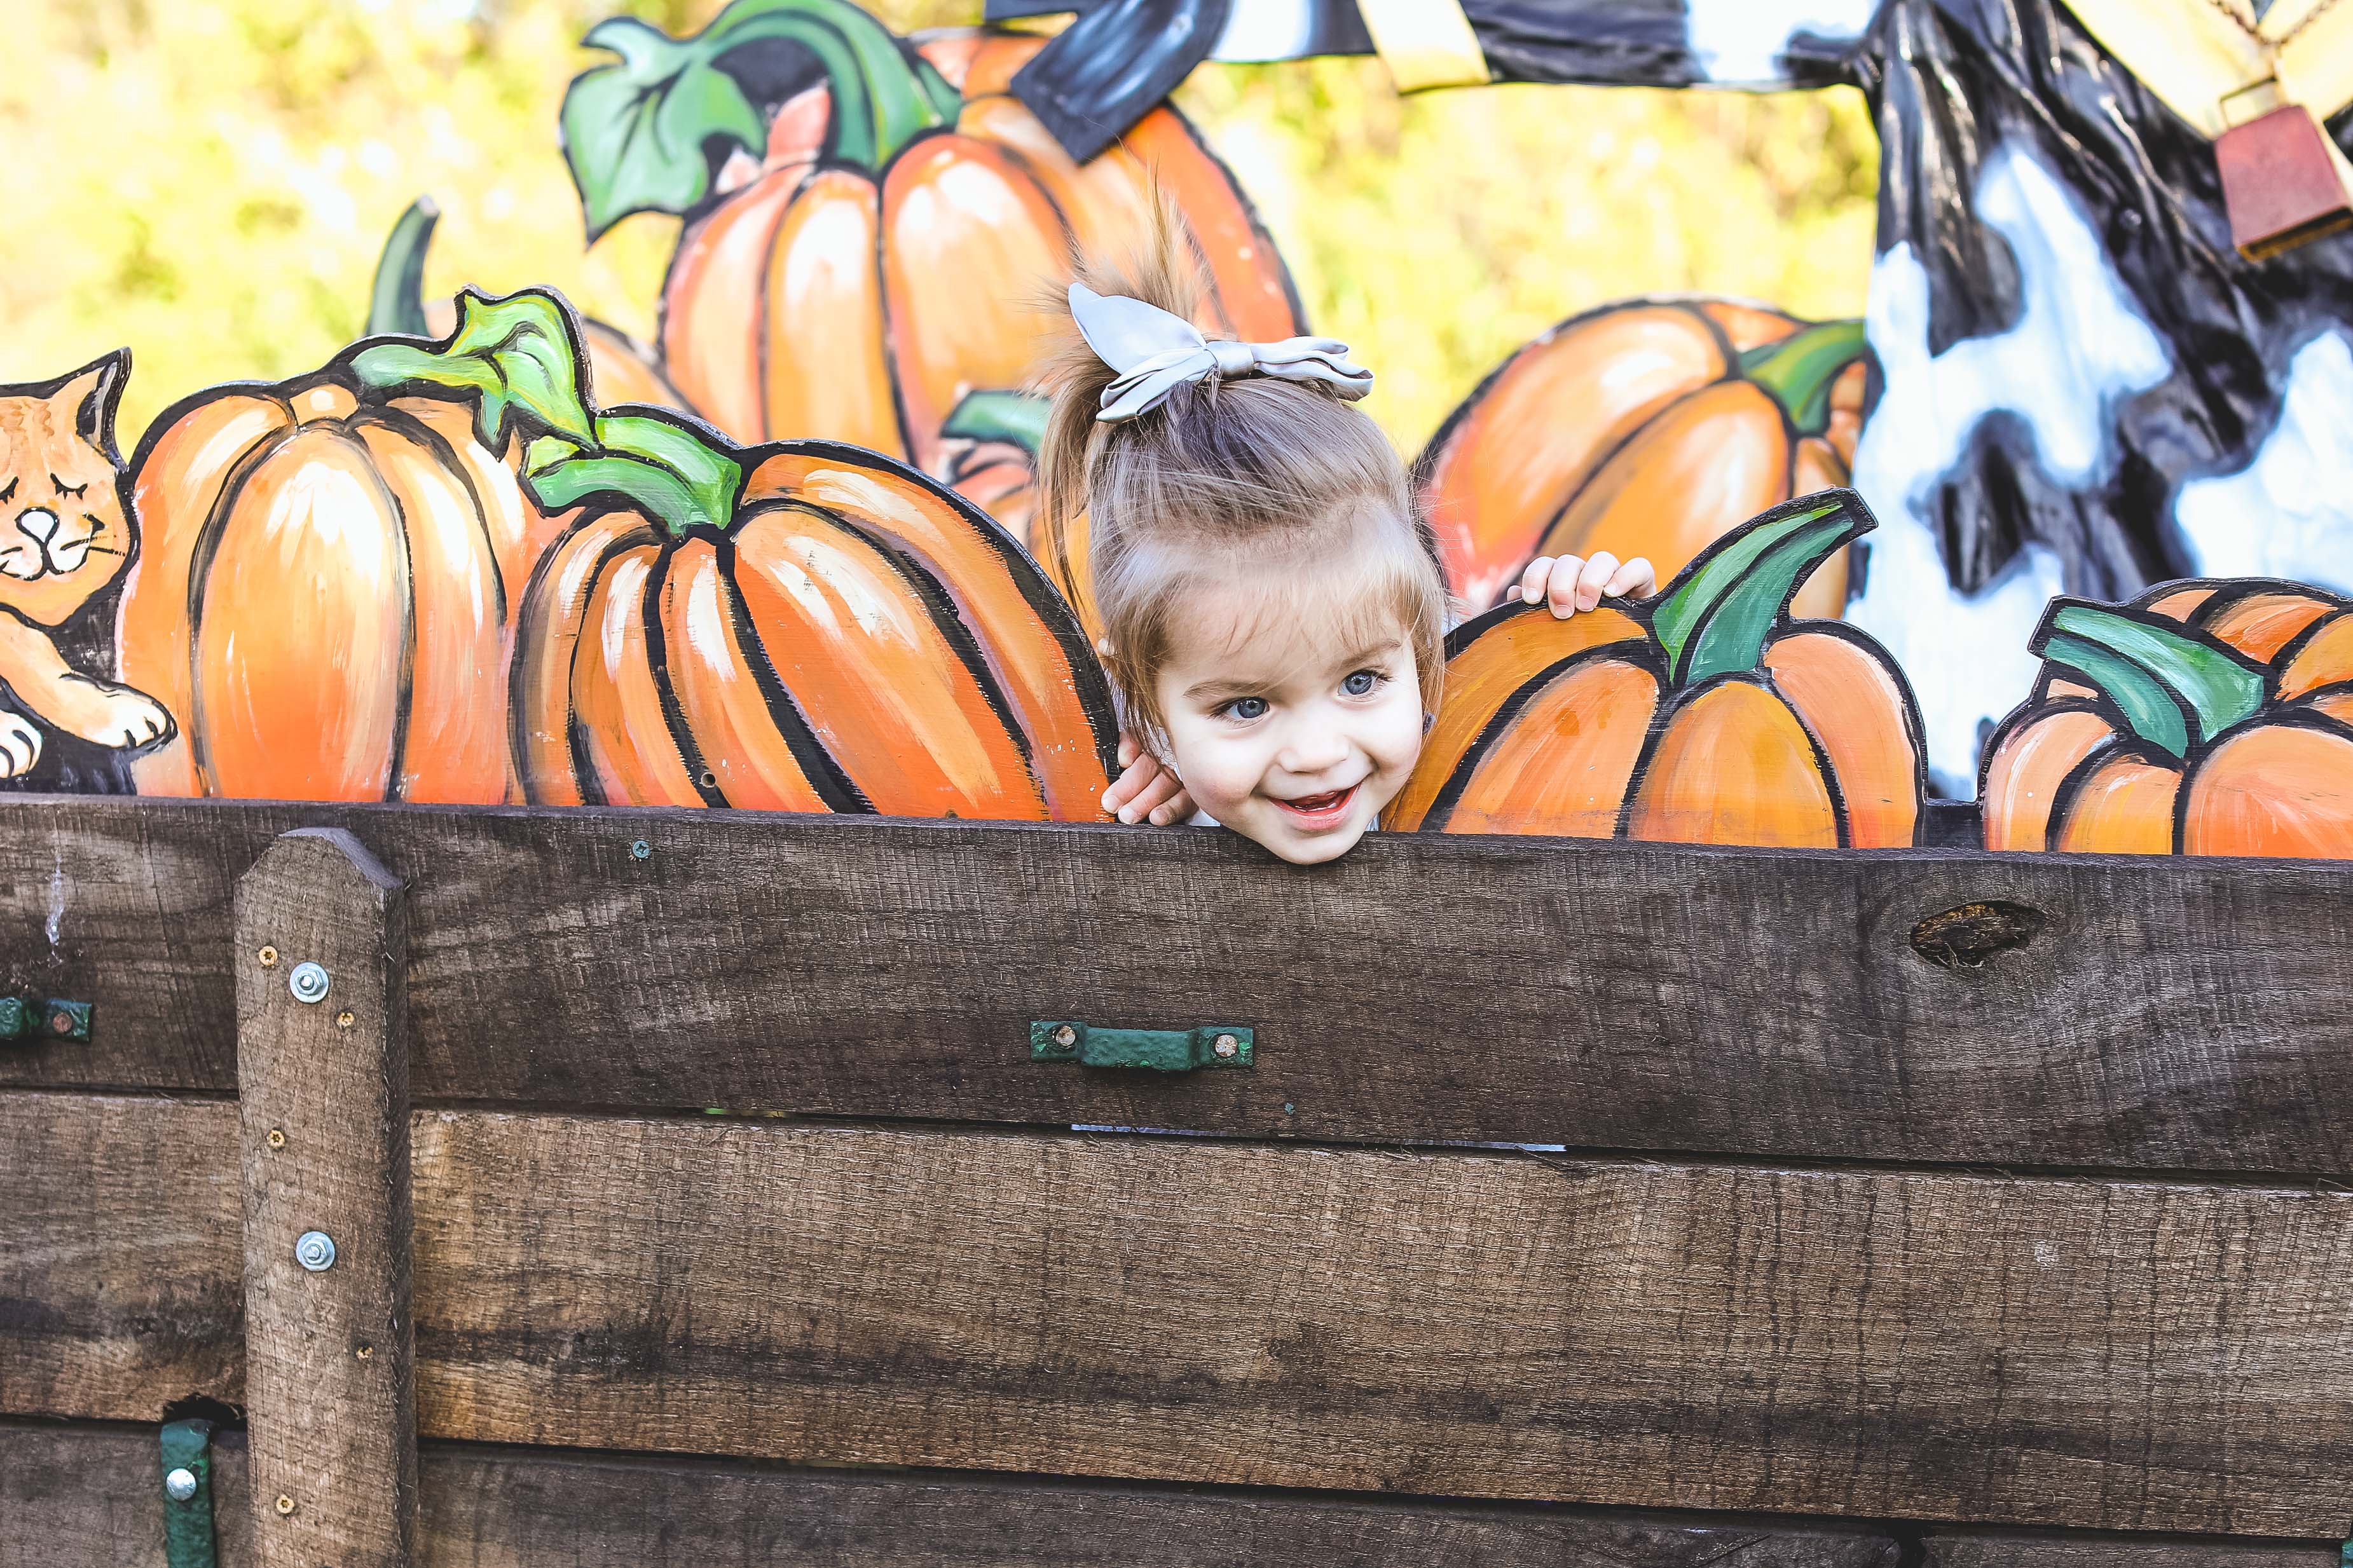 What We Wore to the Pumpkin Patch Casual Fall Outfits angela lanter hello gorgeous